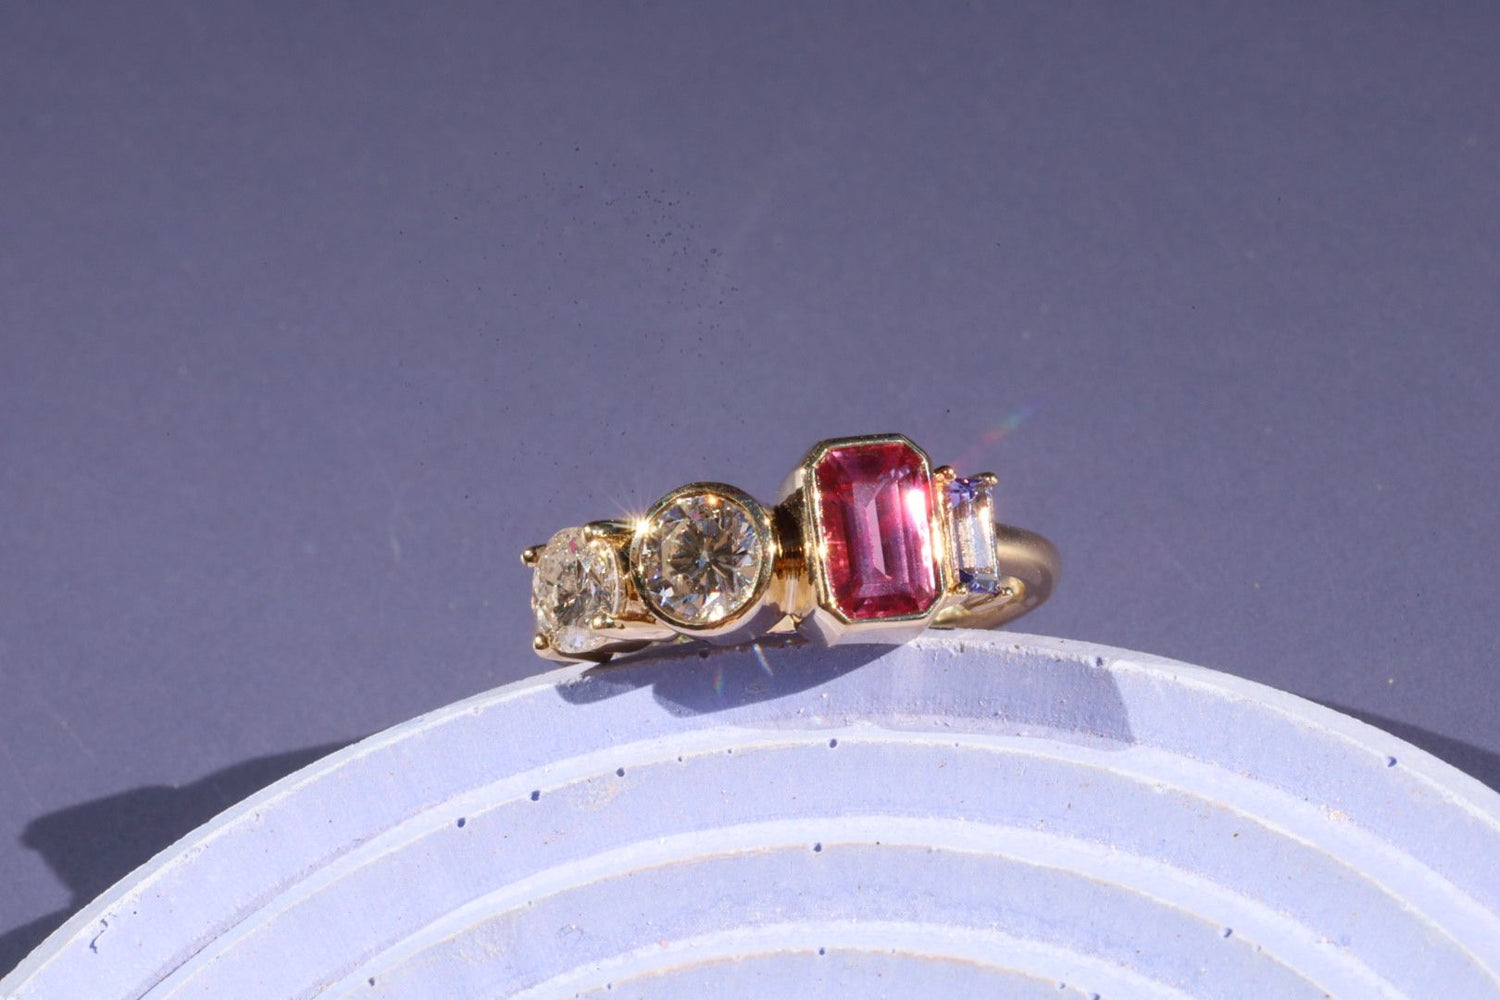 Image of a linear custom rework ring.